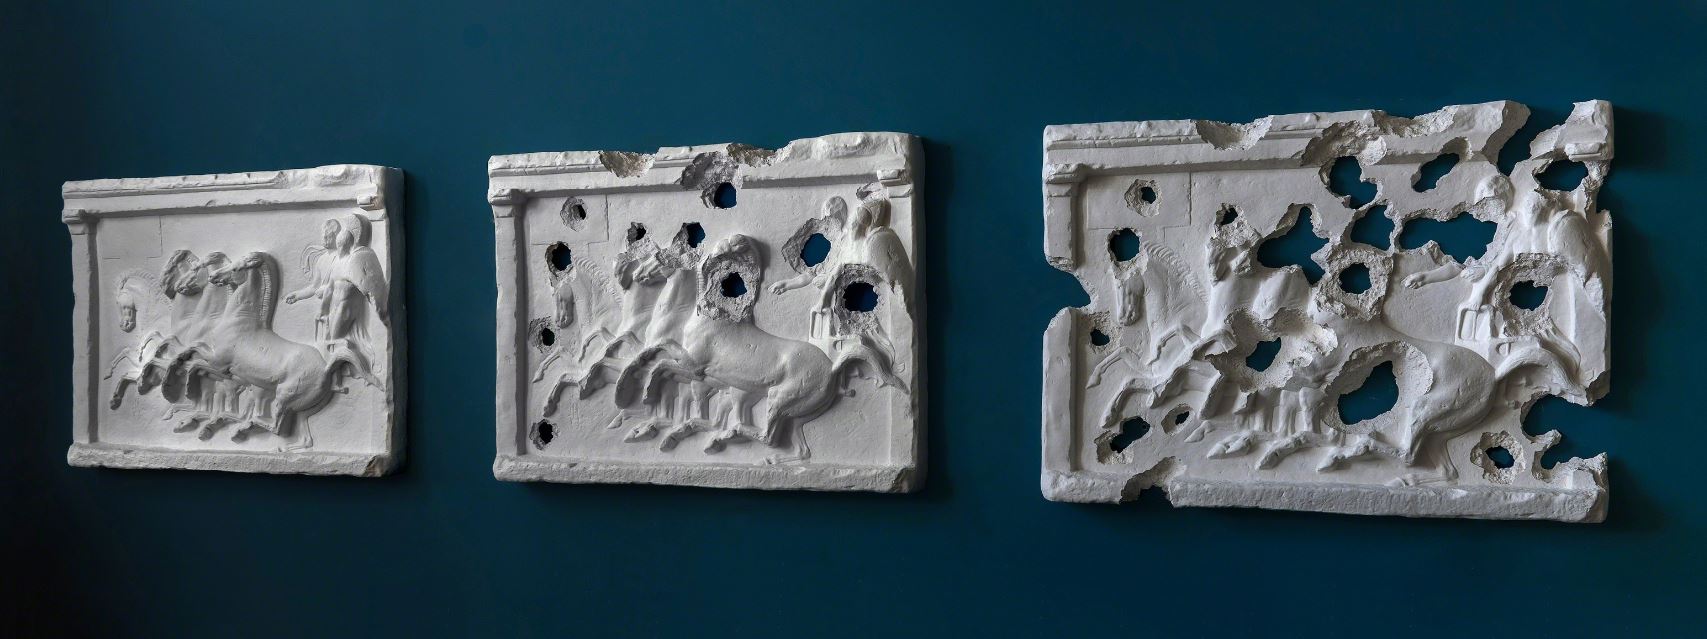 PHOTO: One of the artworks featured is "Four Horses." Artwork by Peter Secunda. Image from Artnsey.Net. Source: https://www.artsy.net/artwork/piers-secunda-isis-bullet-hole-painting-fours-horses